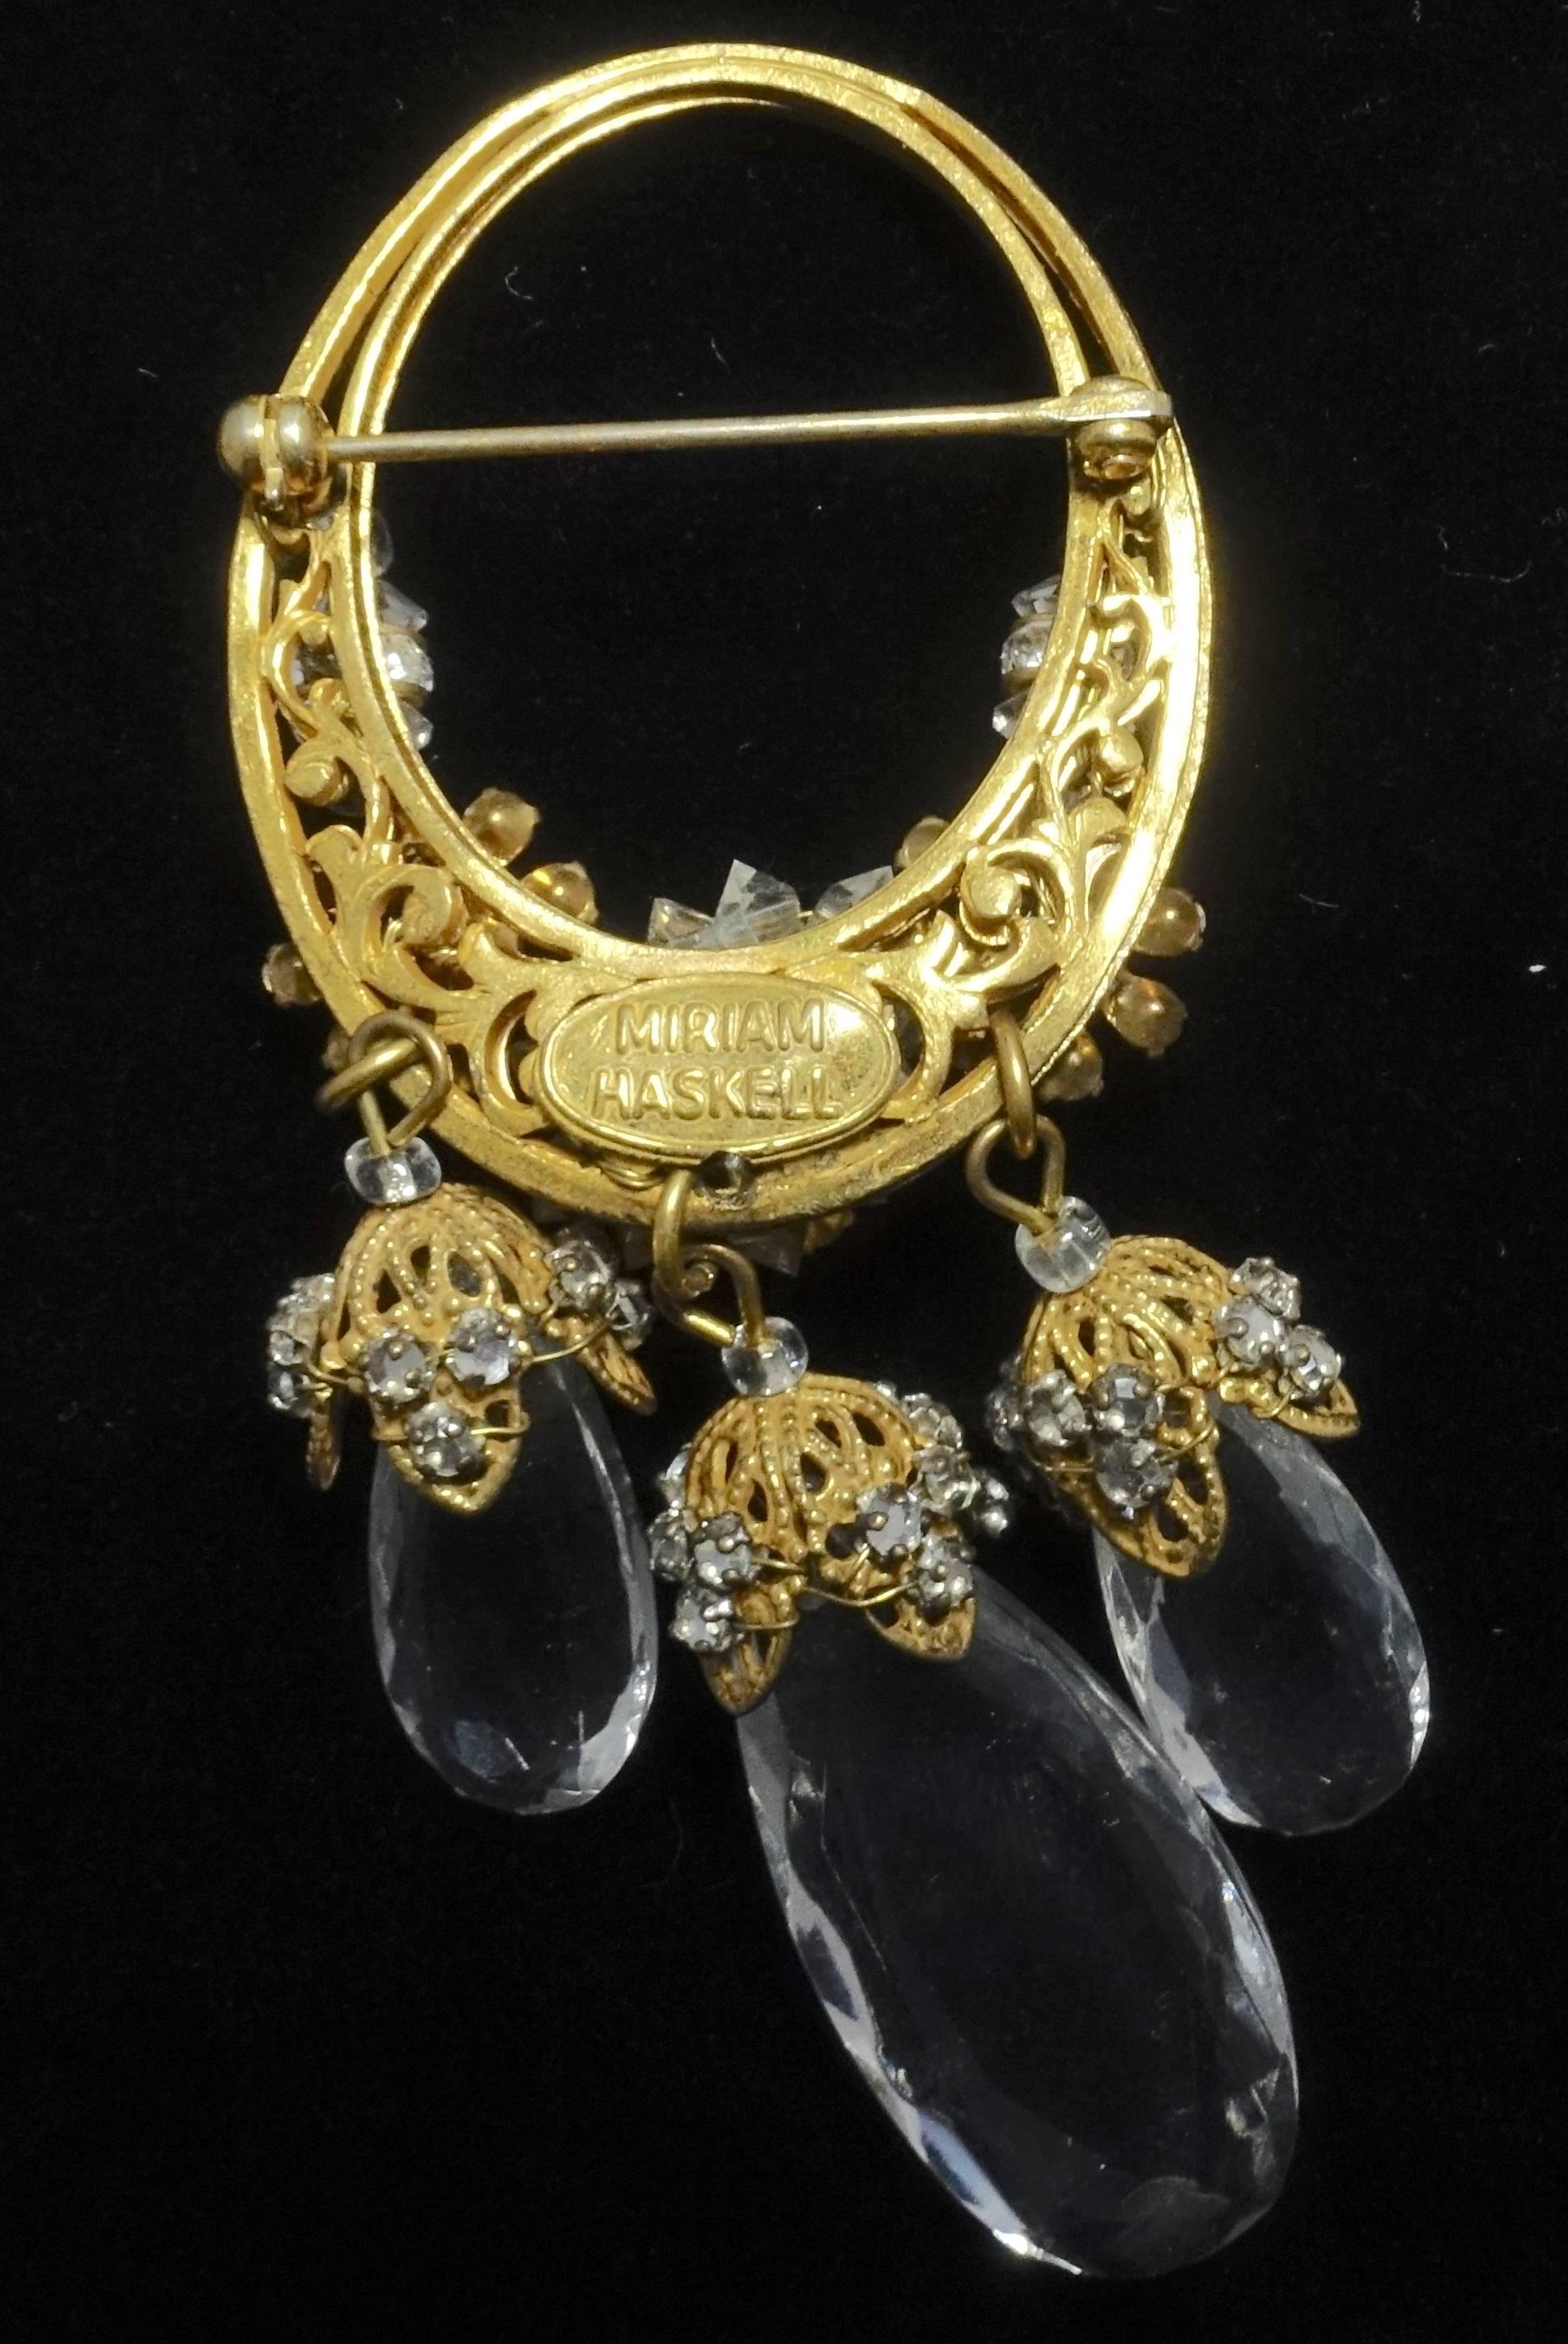 This is a wonderful brooch by Miriam Haskell.  It has a gold tone double oval frame with crystal flowers at the bottom.  There are two small-capped crystals hanging at the bottom with a larger capped crystal in the middle.  It measures 3-3/8” long